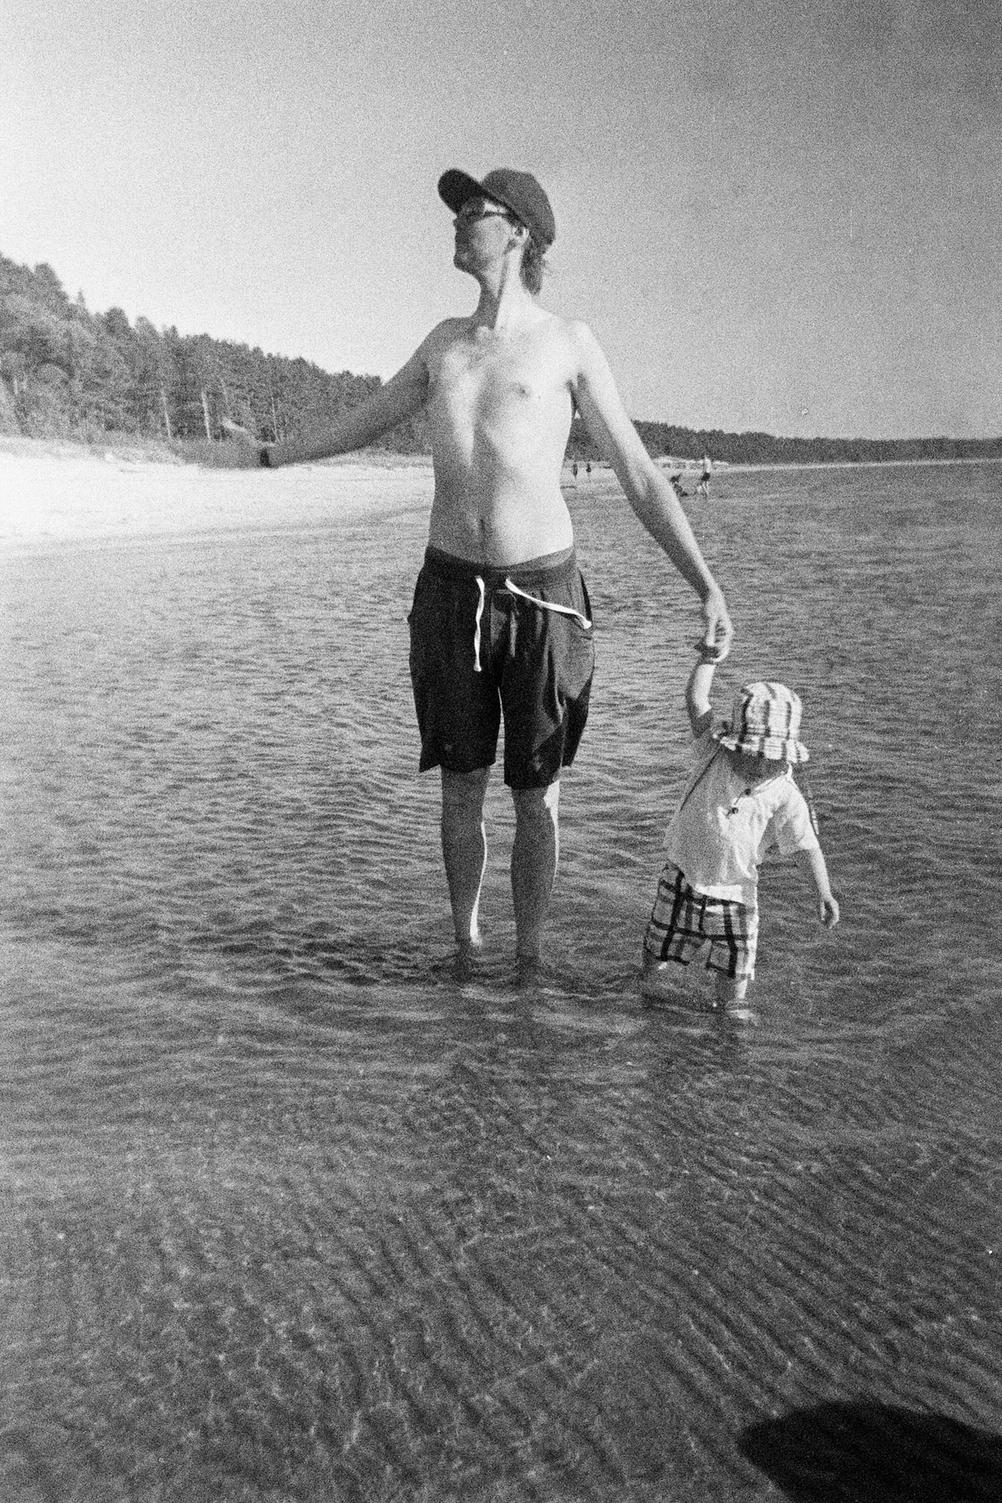 Photo of me and my son on the beach.